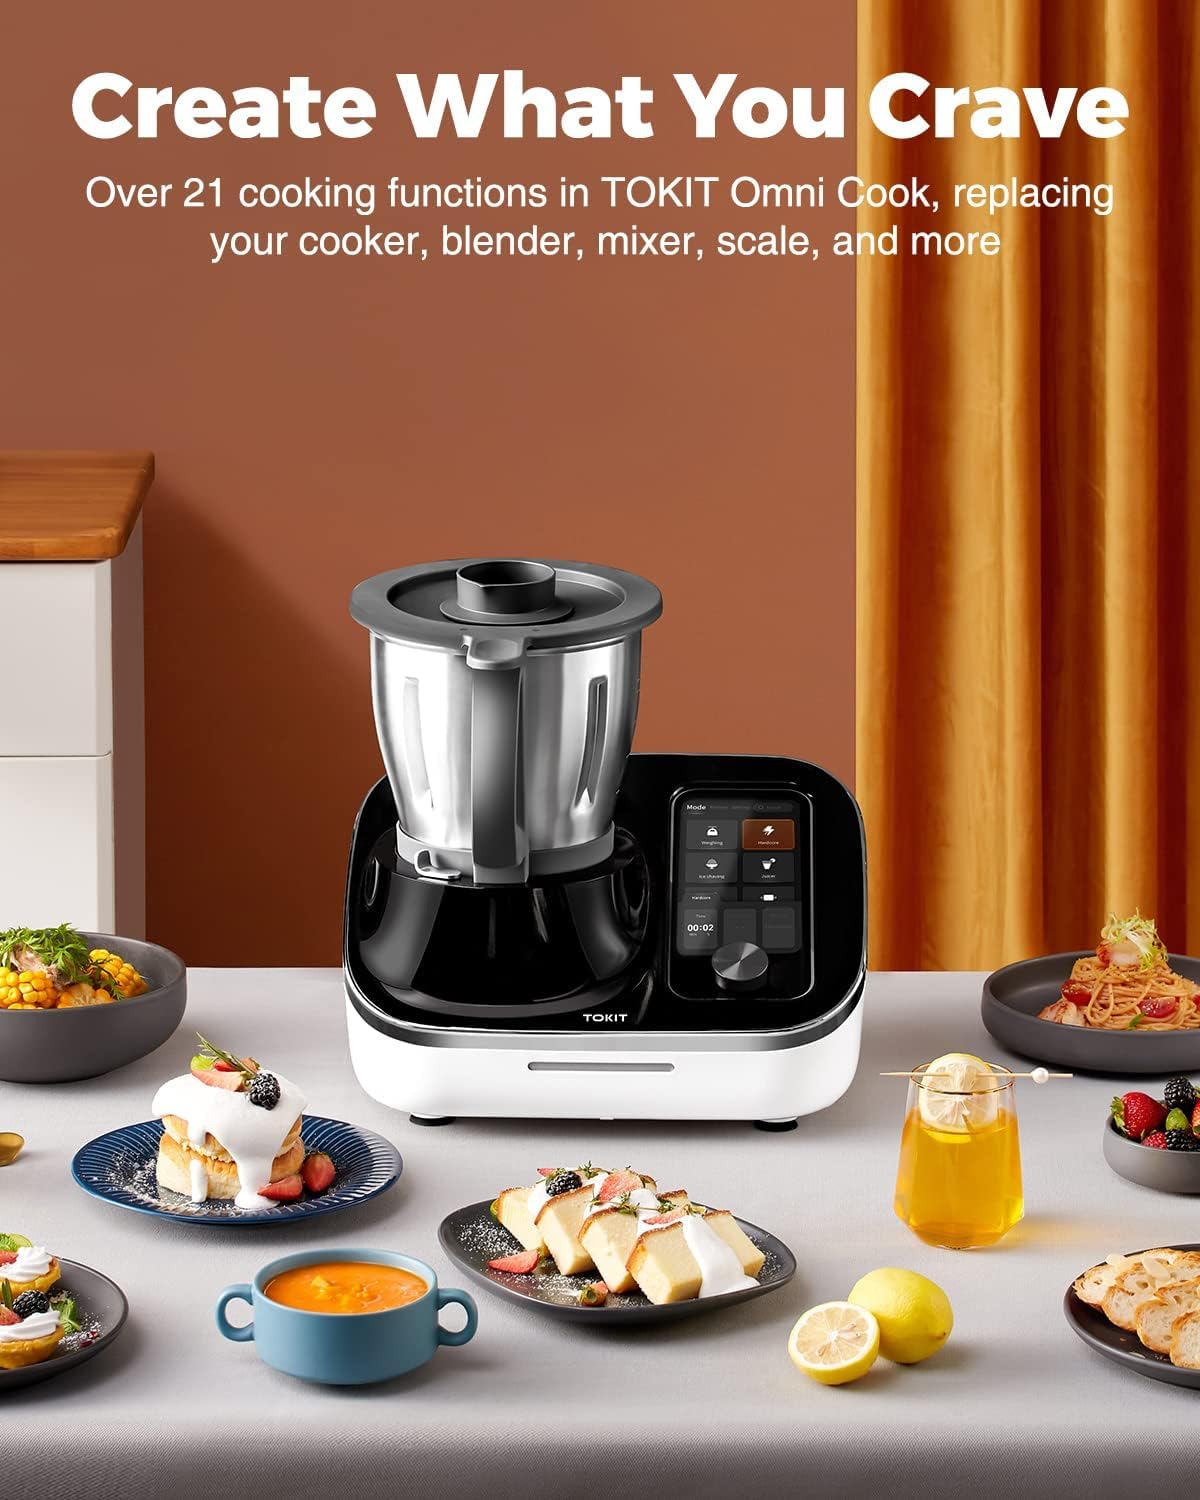 TOKIT Omni Cook Robot All - in - 1 Food Processor with 21 Cooking Functions Built - in 7'' Touch Screen Guided Recipes Pre - clean, Chopper, Juicer, Blender, Mixer, Weigh, Sous - Vide, Ice Crush and more - Amazing Gadgets Outlet